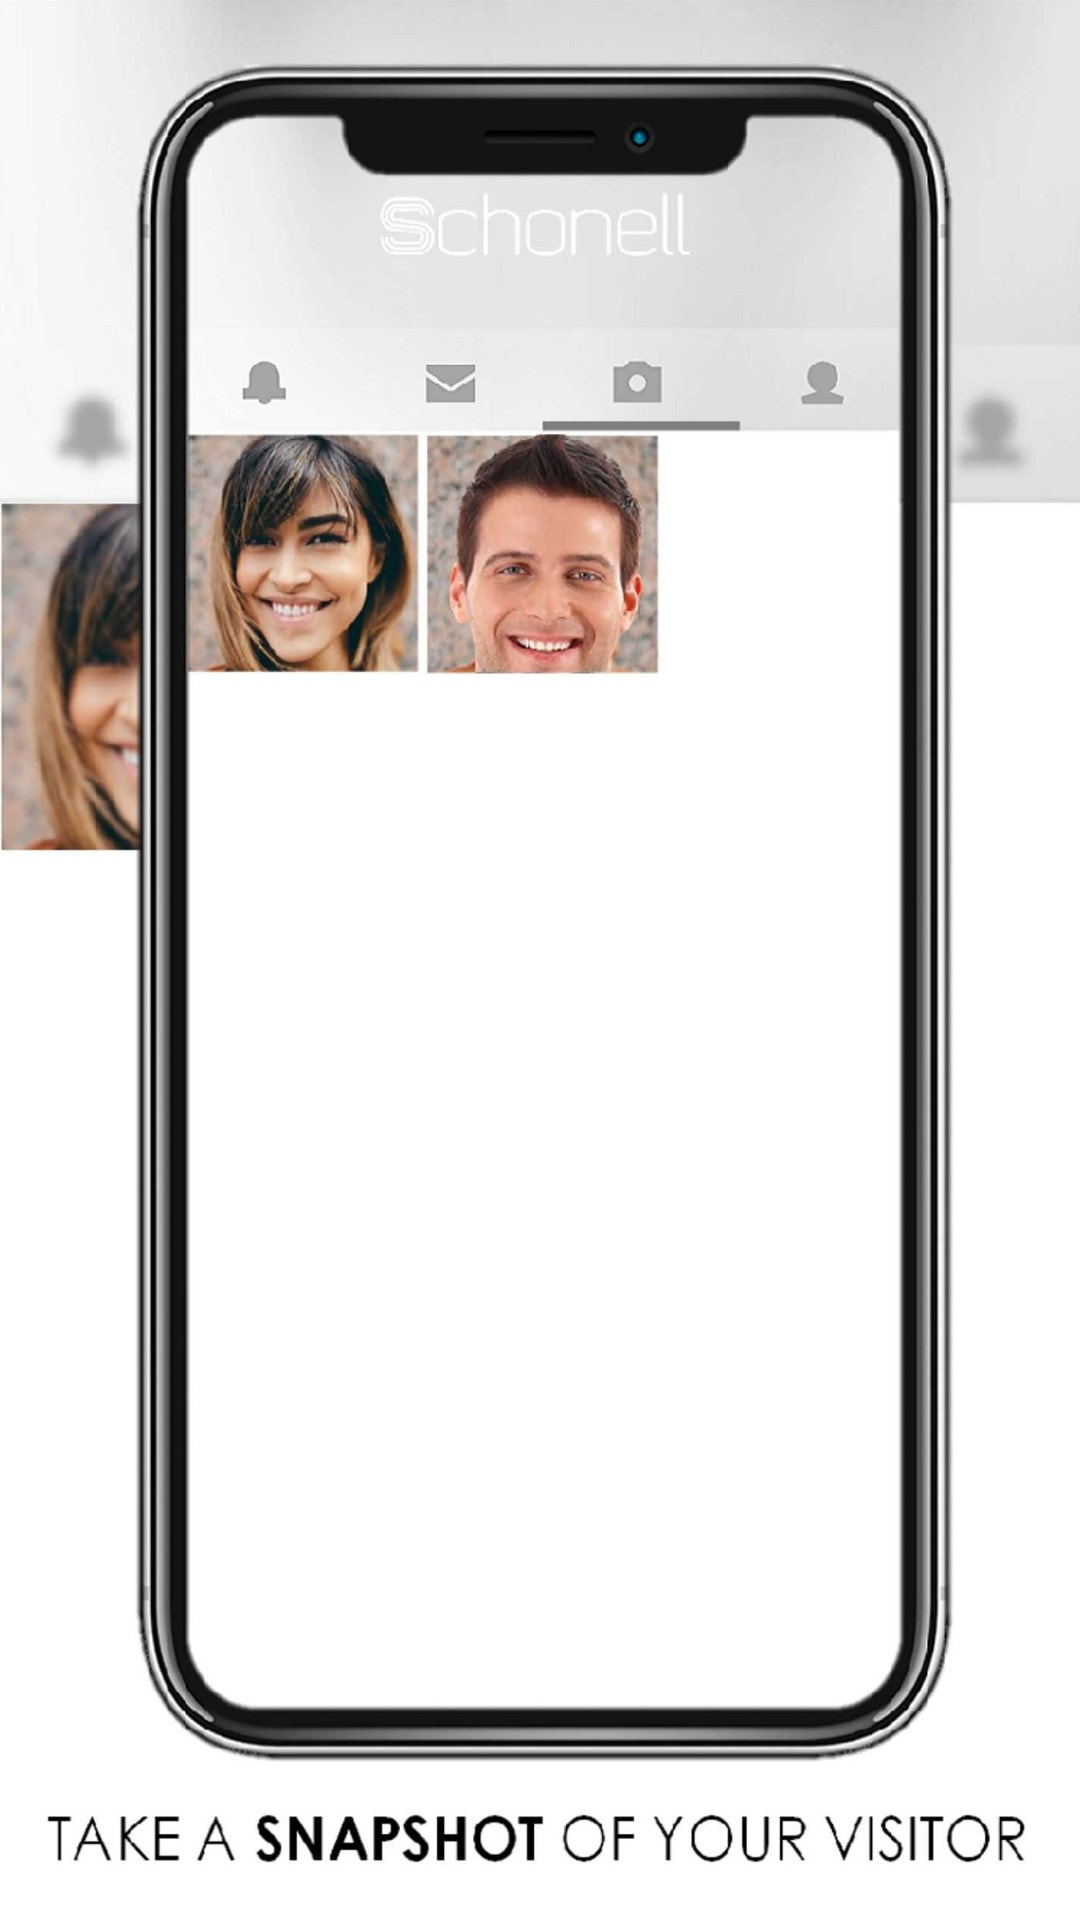 Schonell App: Log in Page | Video Calls